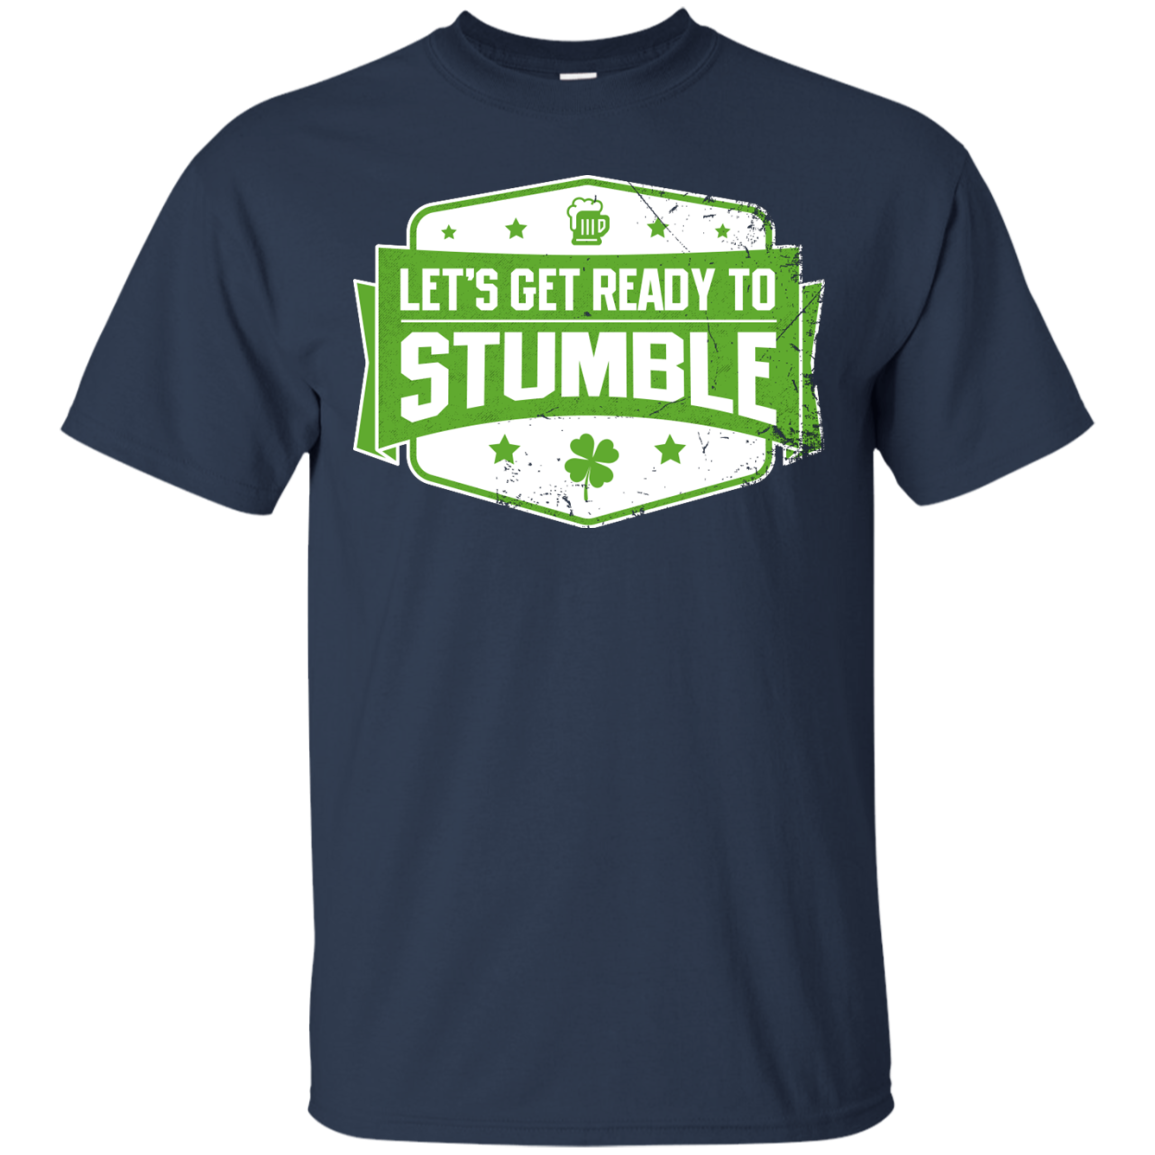 Let's Get Ready To Stumble T-Shirt Apparel - The Beer Lodge